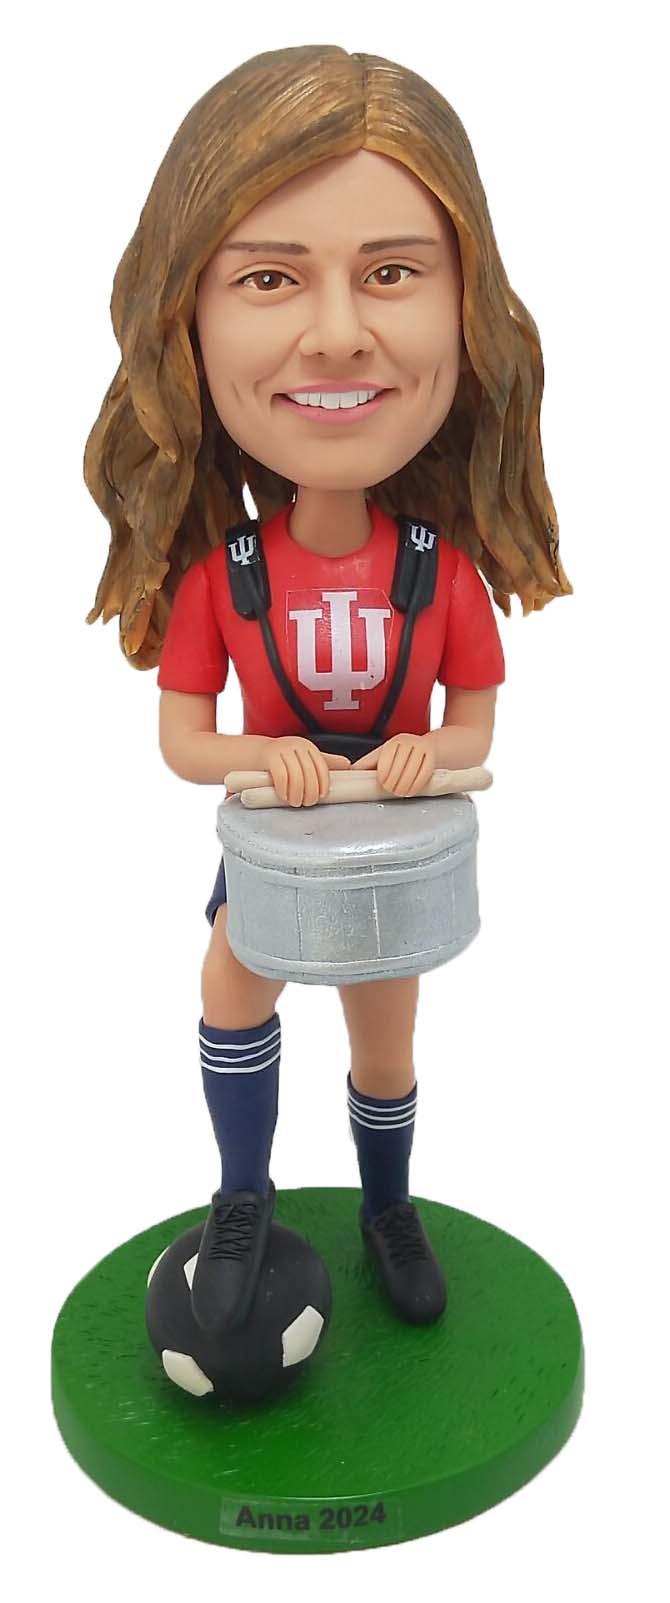 Custom Bobblehead Personalized Bobbleheads Soccer Player with Drum